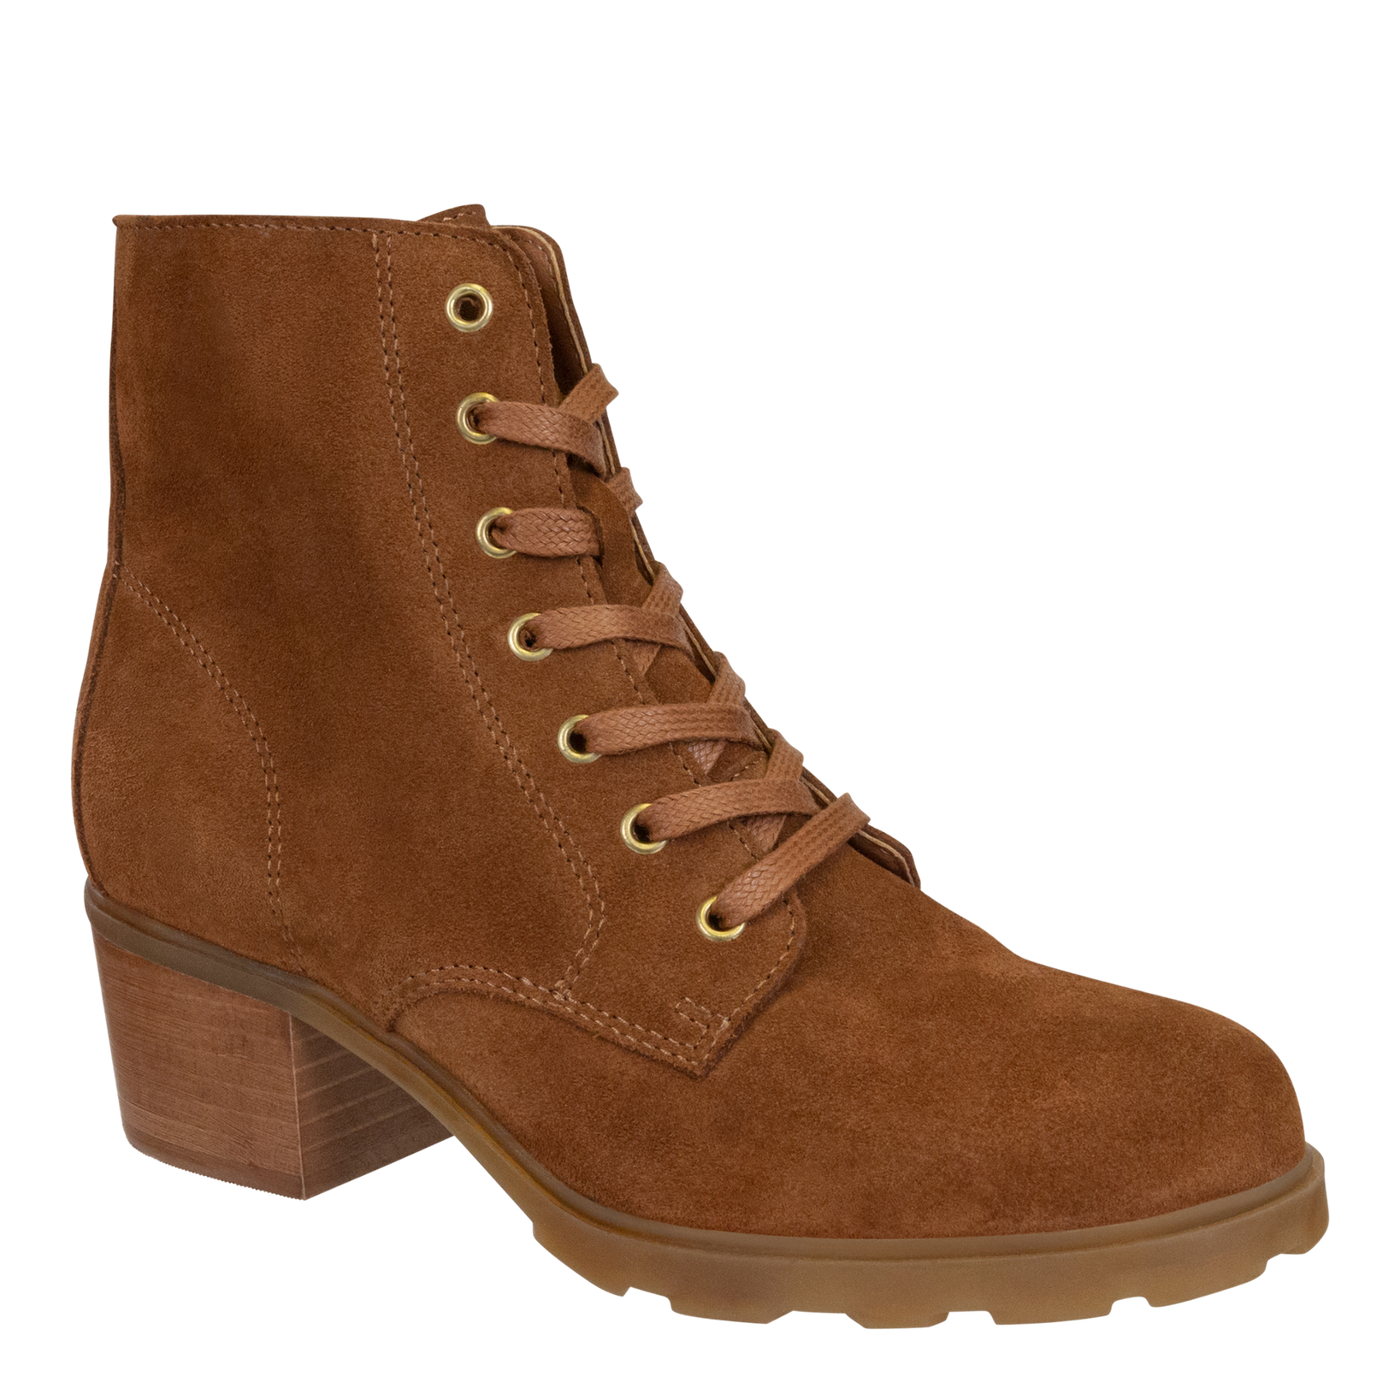 OTBT - ARC in CAMEL Heeled Ankle Boots